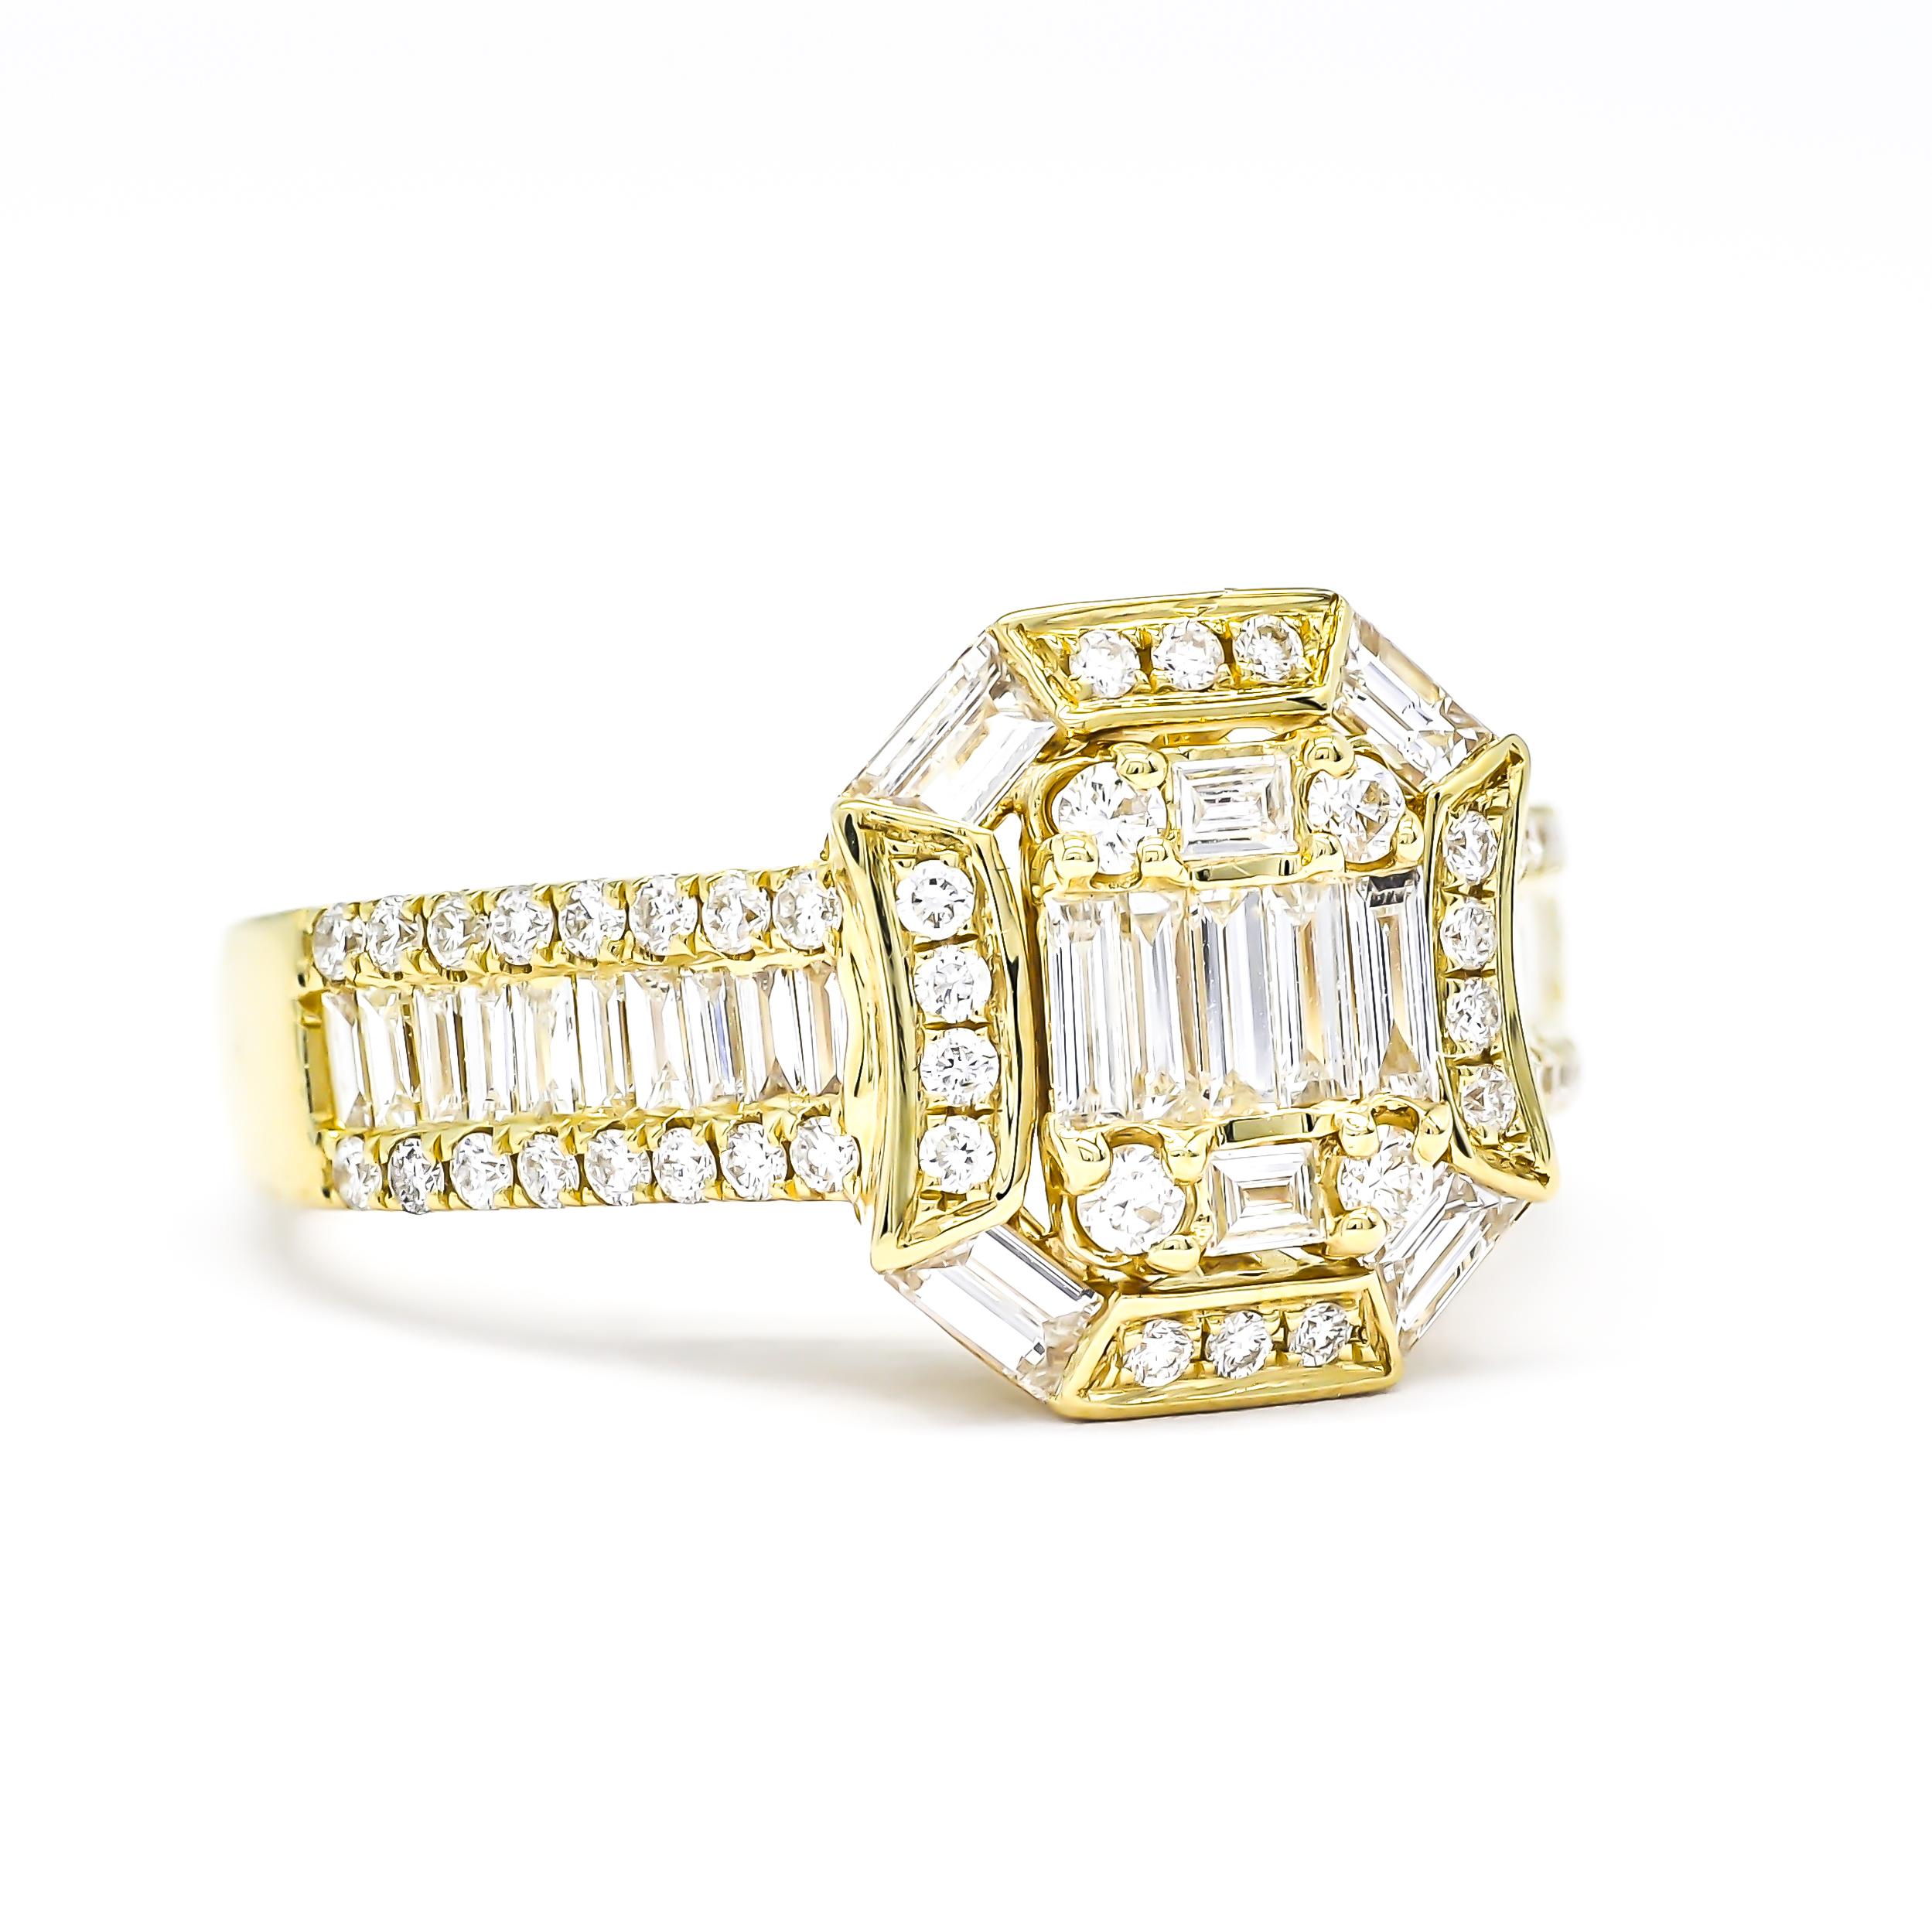 Ultra-modern and gorgeously glam, vow to sparkle with this uniquely elegant baguette and round-cut diamond engagement ring, artistically rendered in white gold. Additional baguette and Round stones decorate the polished yellow gold shank in a unique